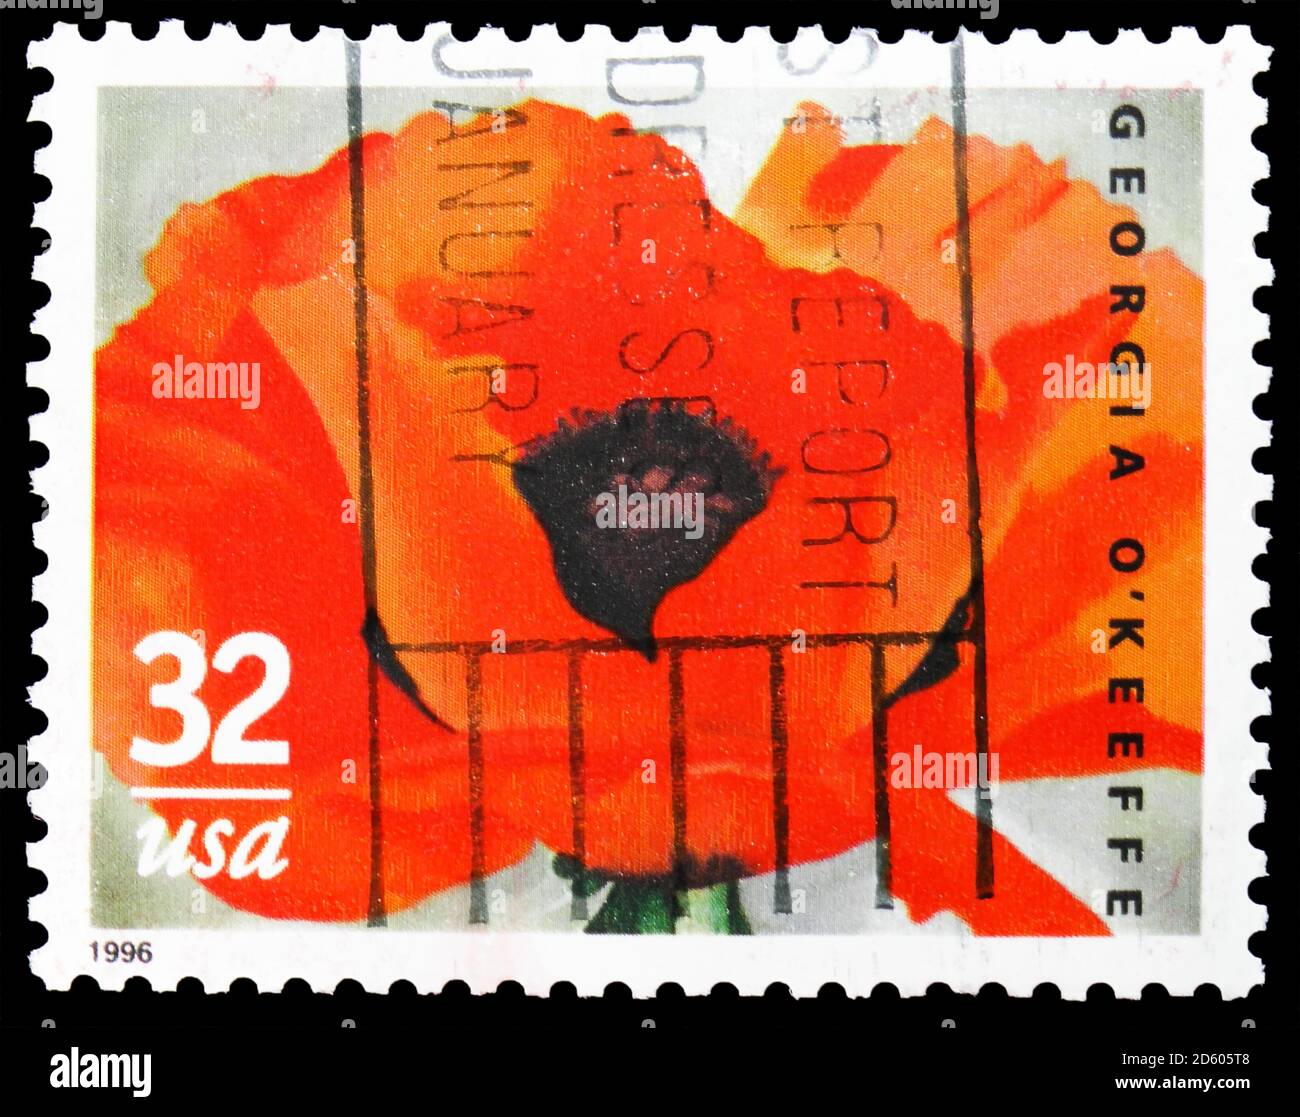 MOSCOW, RUSSIA - SEPTEMBER 30, 2020: Postage stamp printed in United States shows Georgia O'Keeffe, serie, circa 1996 Stock Photo